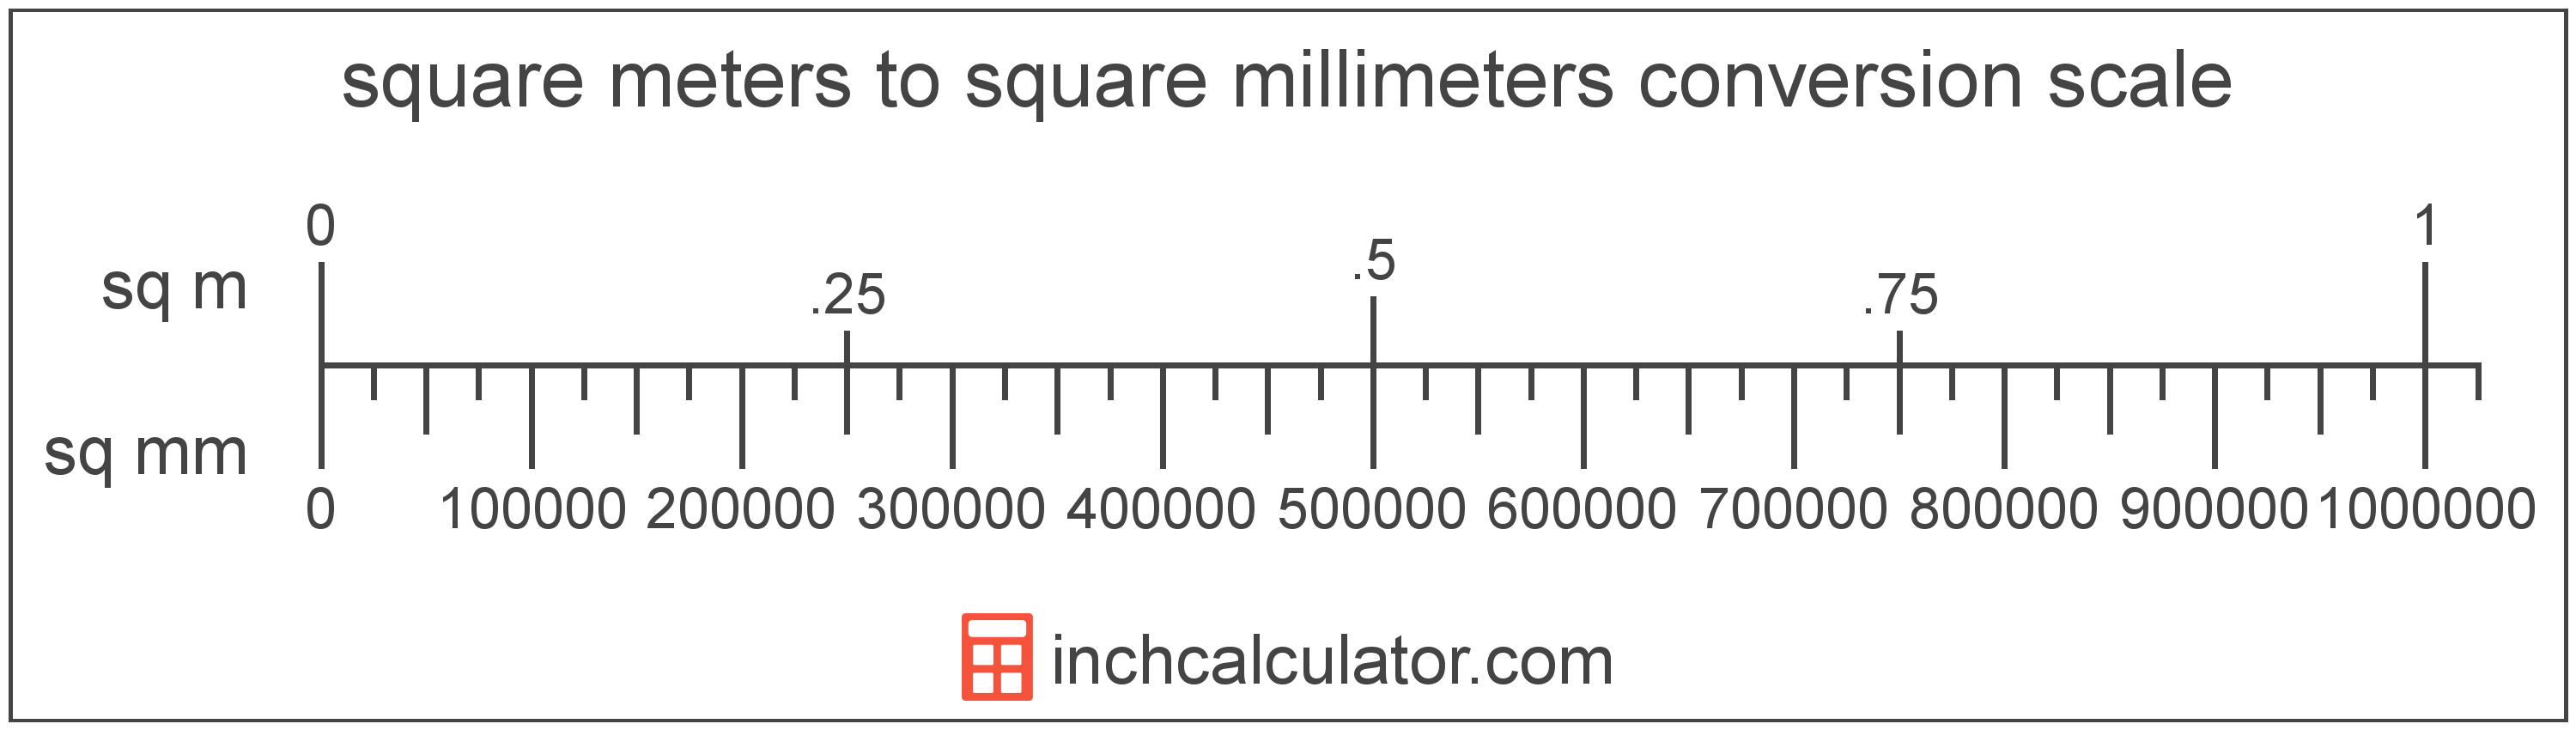 conversion scale showing square meters and equivalent square millimeters area values